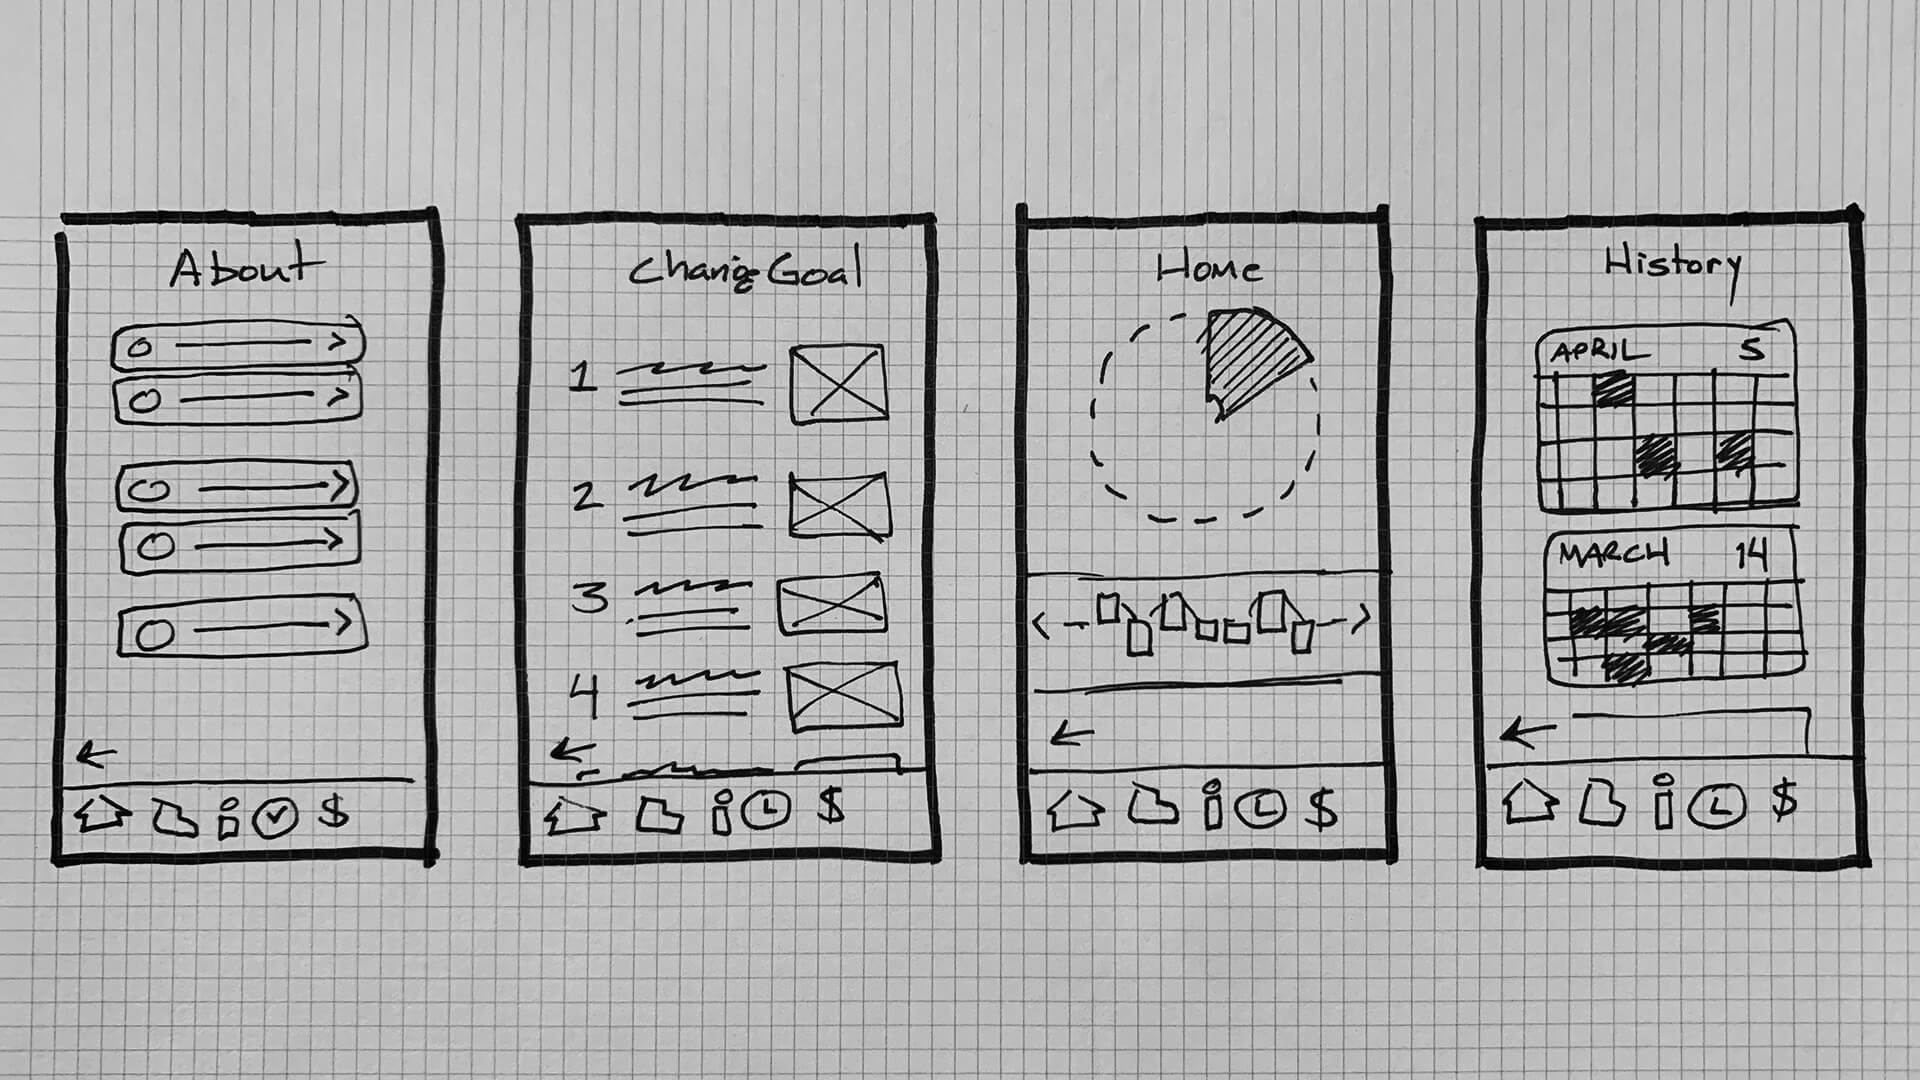 Original market sketches for iPhone showing the about, how to change goal, home, and history screens.